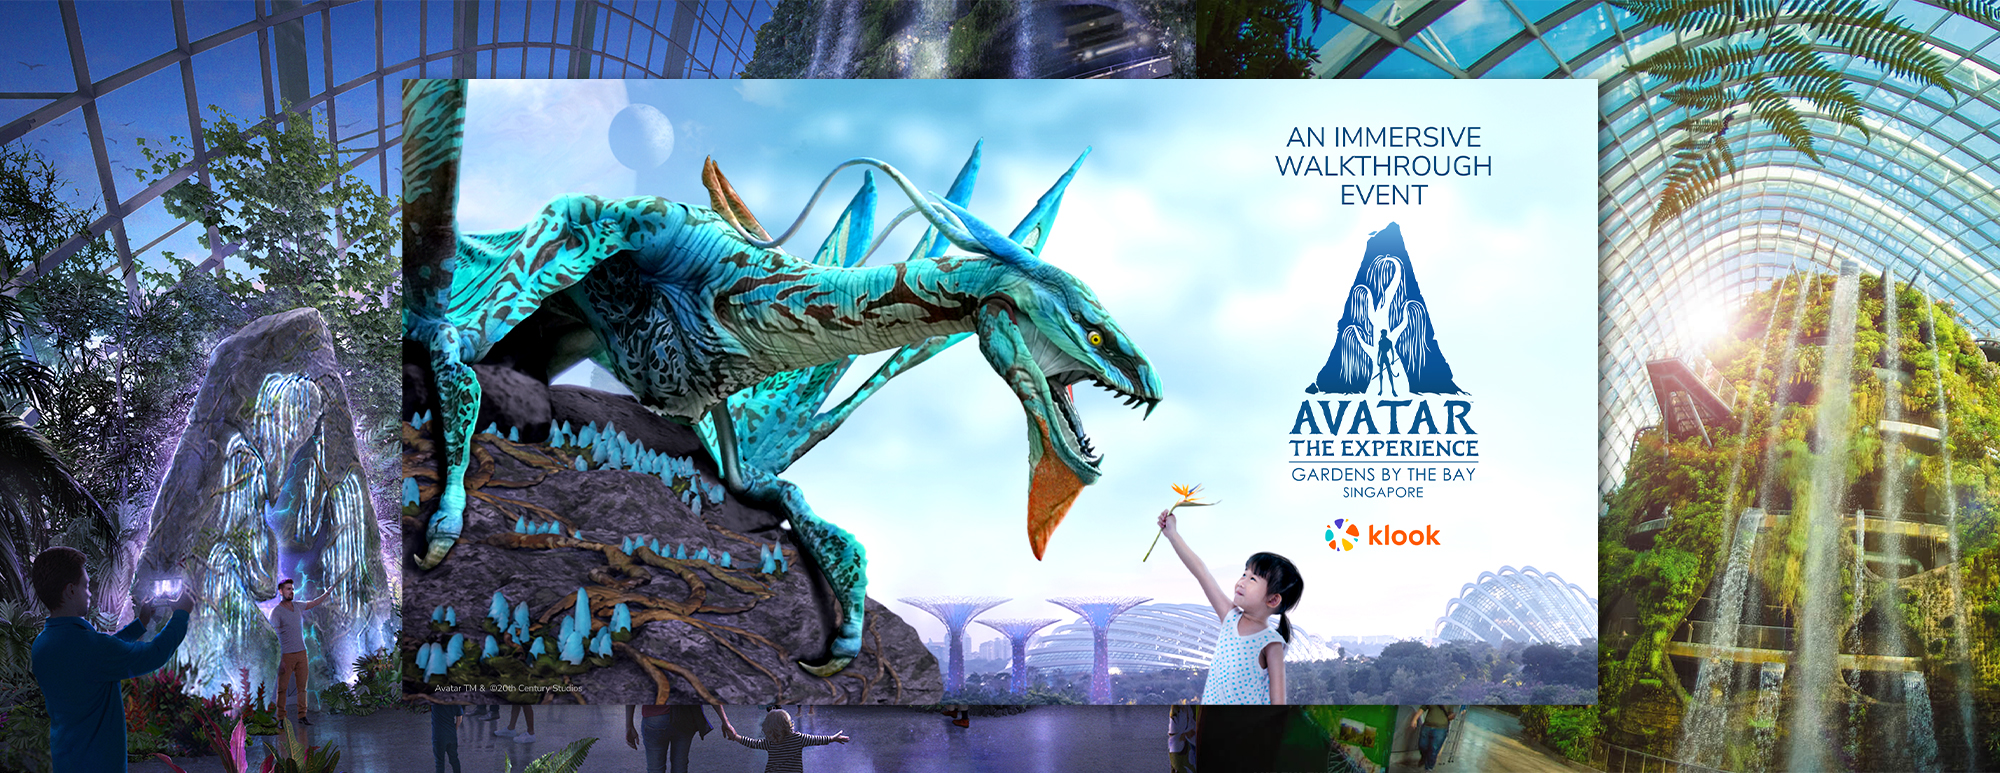 Avatar The Experience  an immersive walkthrough event coming to Gardens  By The Bay